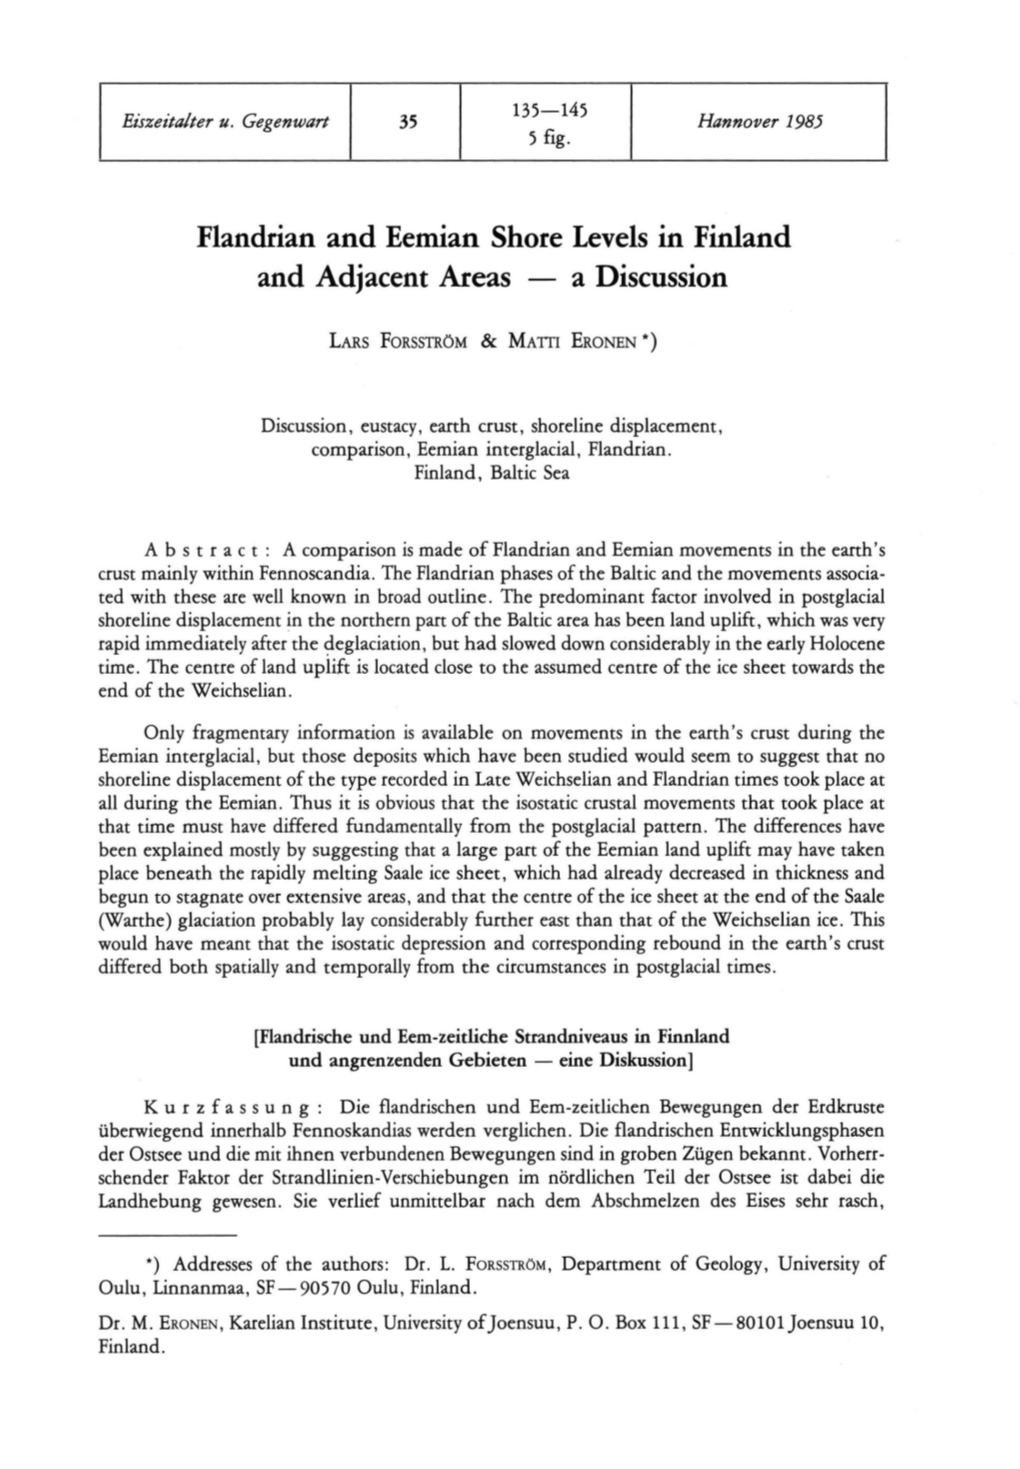 Flandrian and Eemian Shore Levels in Finland and Adjacent Areas — a Discussion